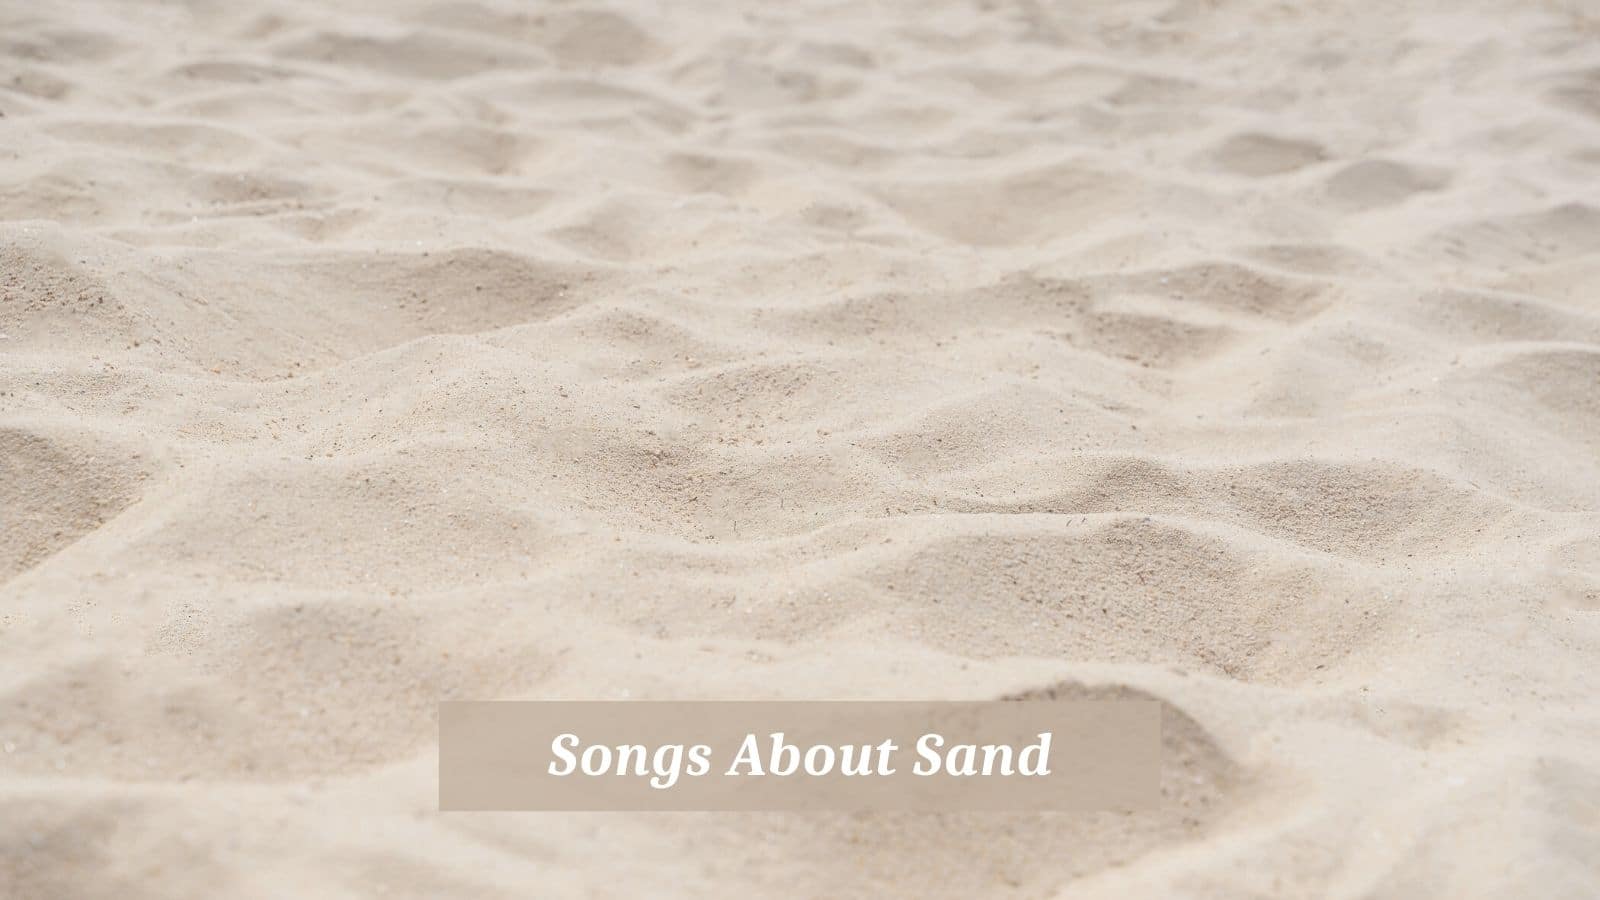 Songs About Sand